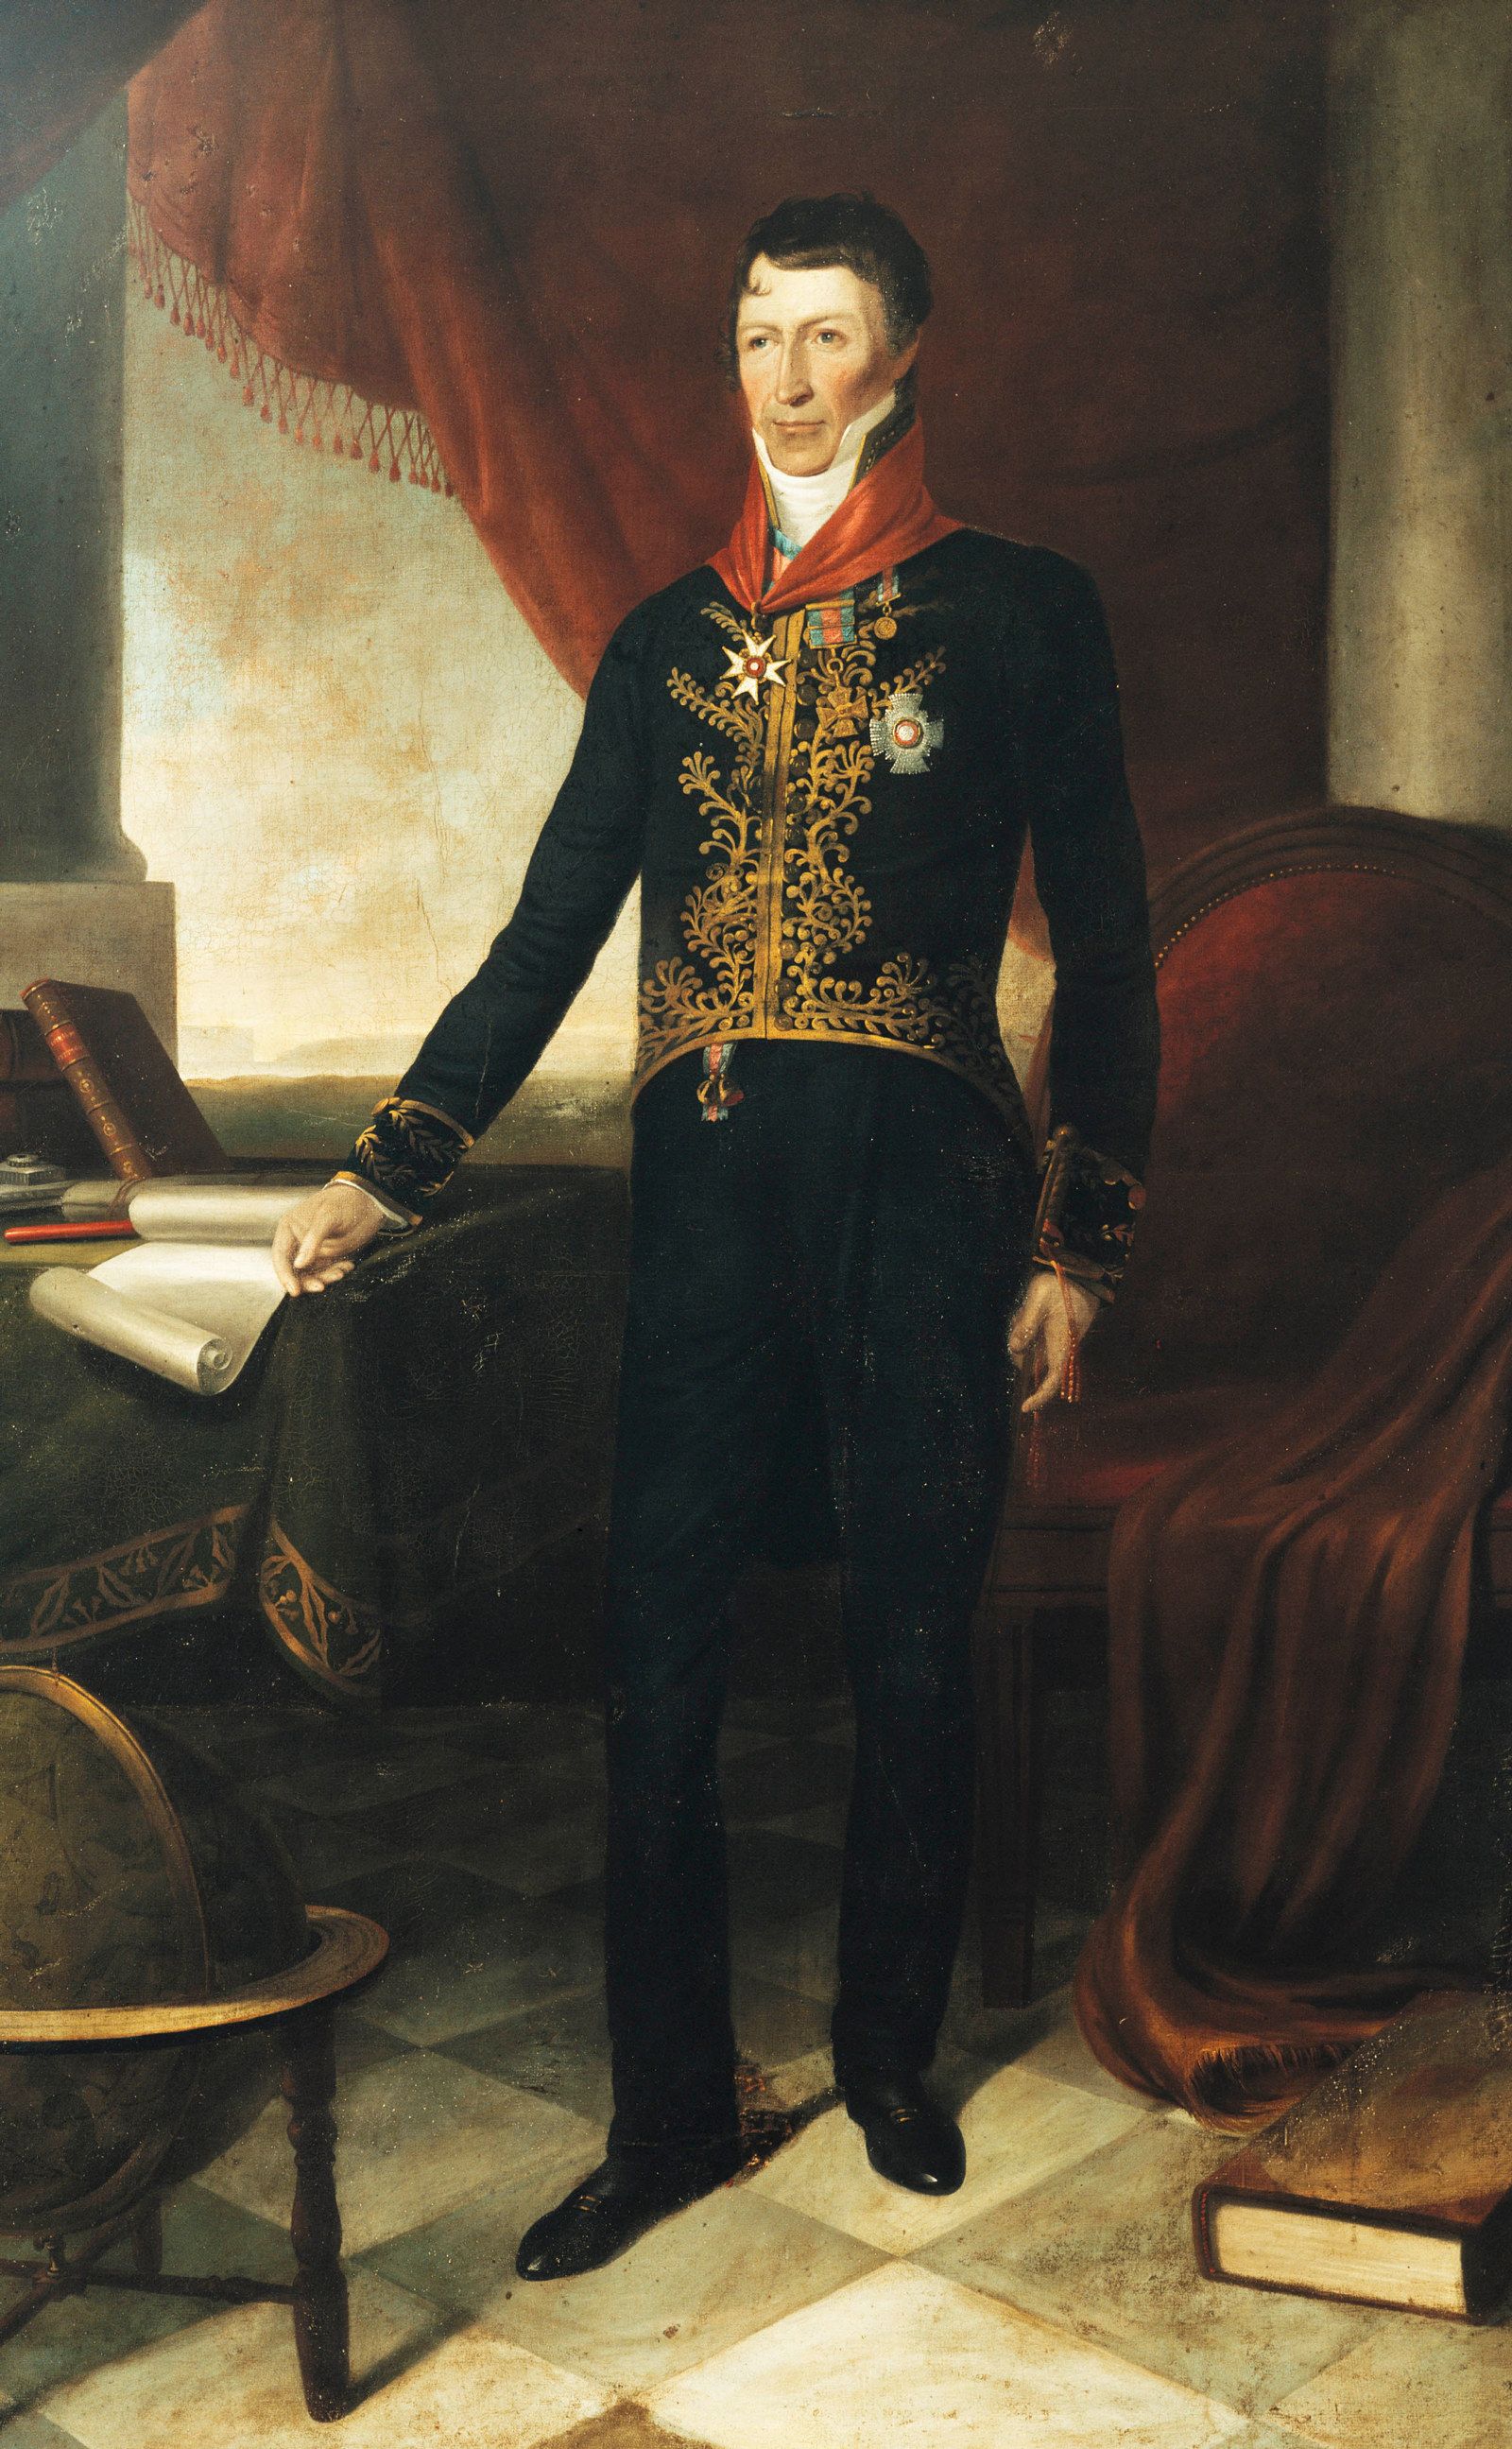 Portrait (painting) of a man in formal attire